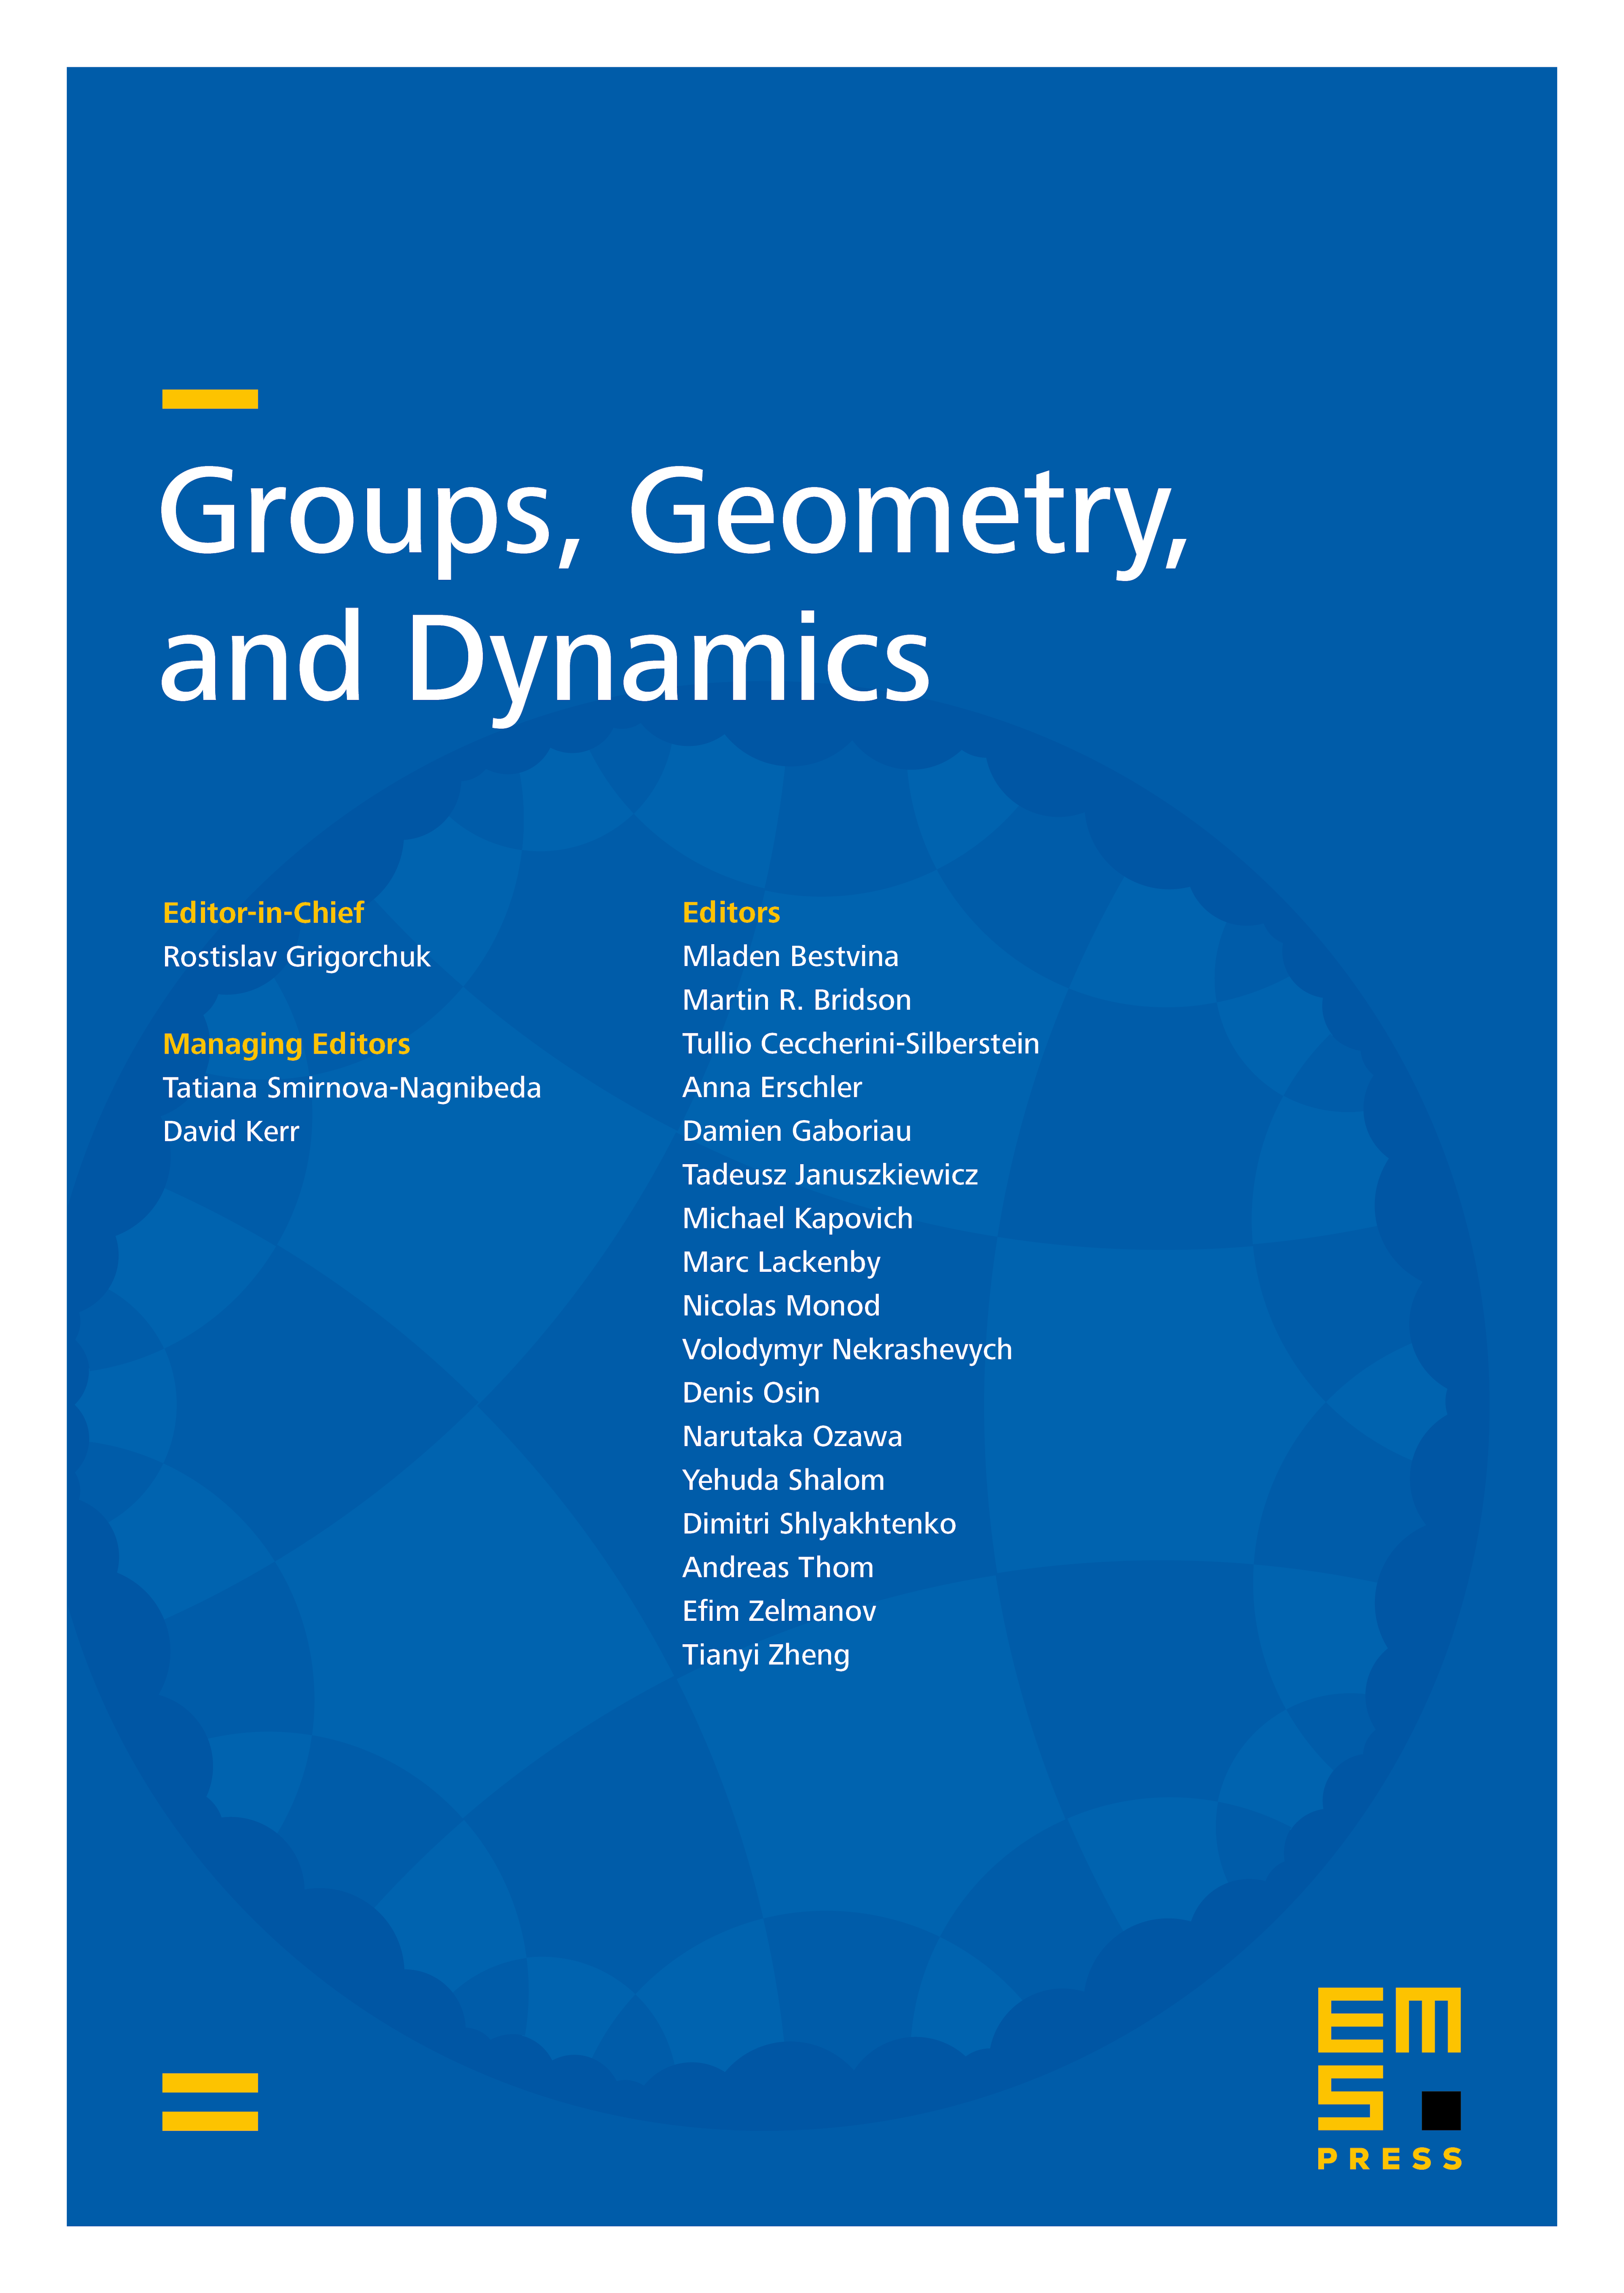 Quadratic equations in the Grigorchuk group cover